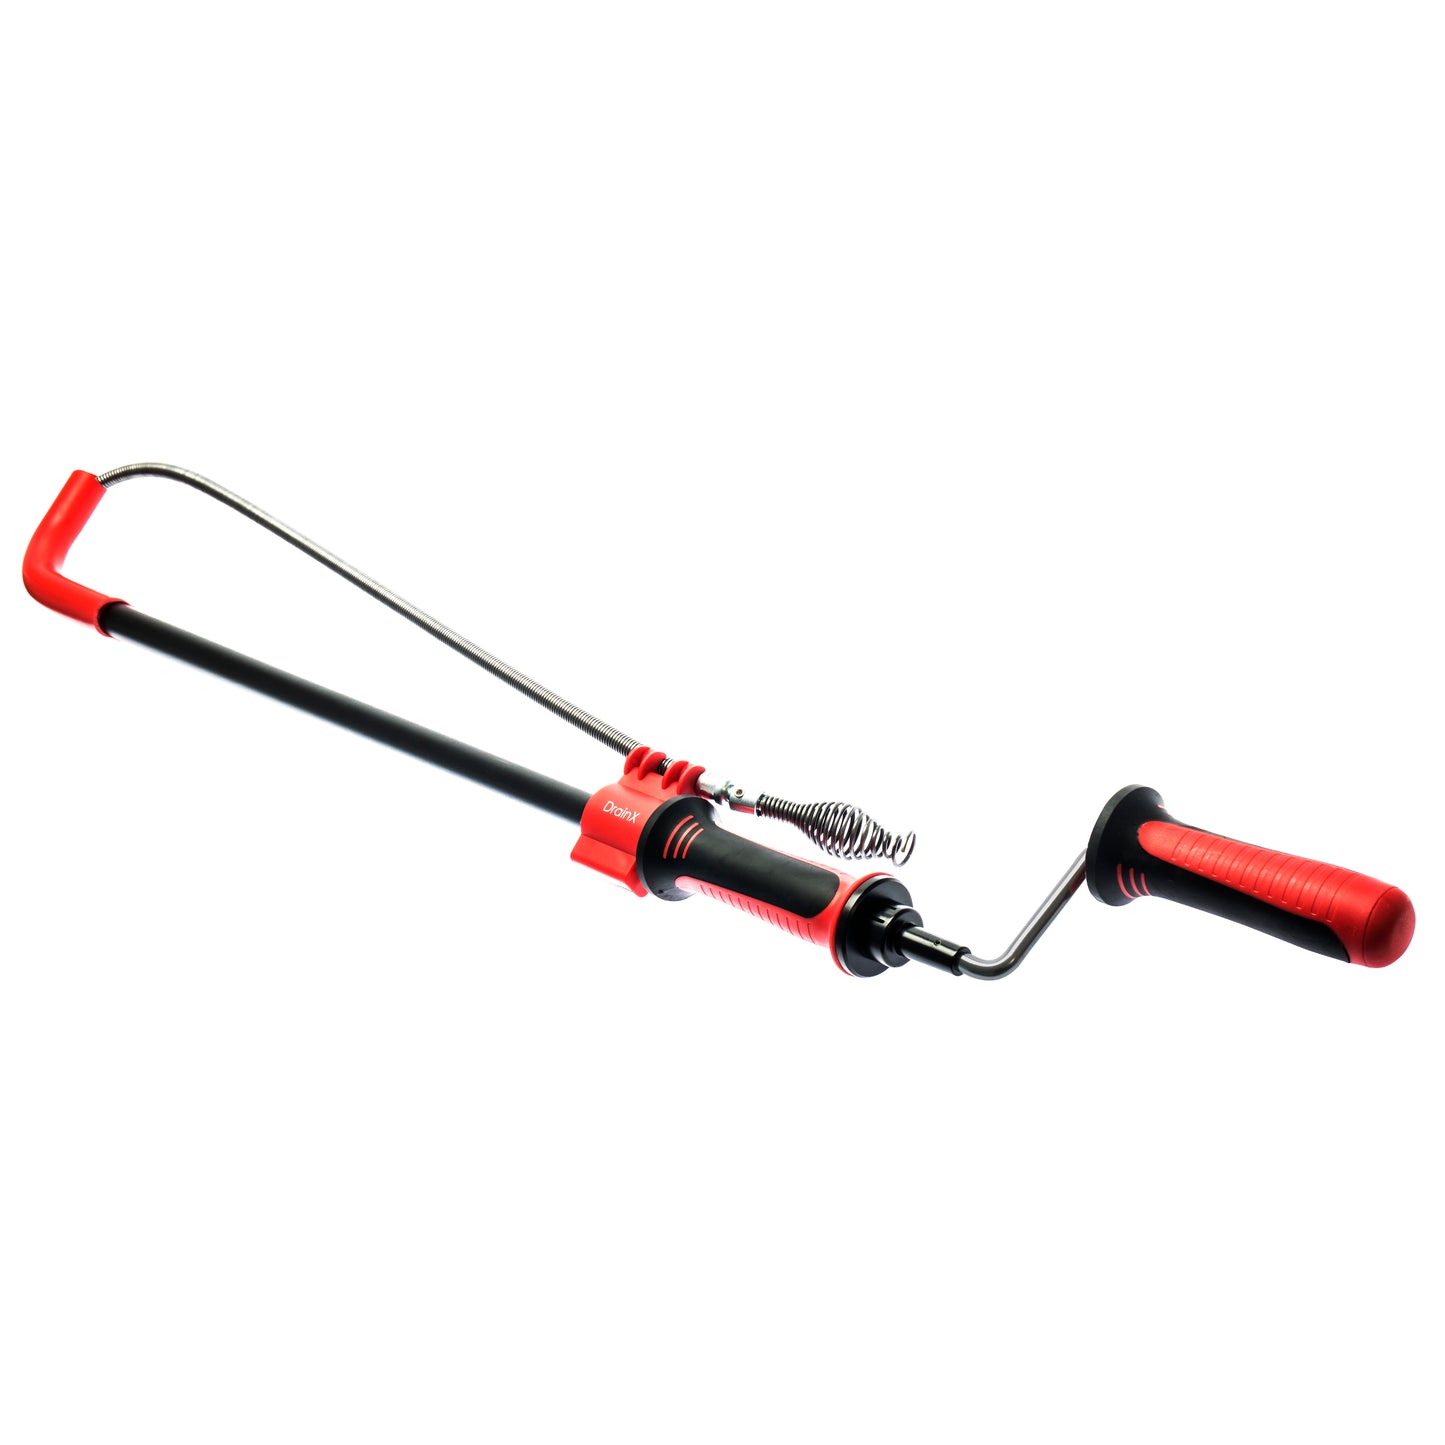 6FT Toilet Auger with Heavy Duty Drophead | Use with Drill or Manually